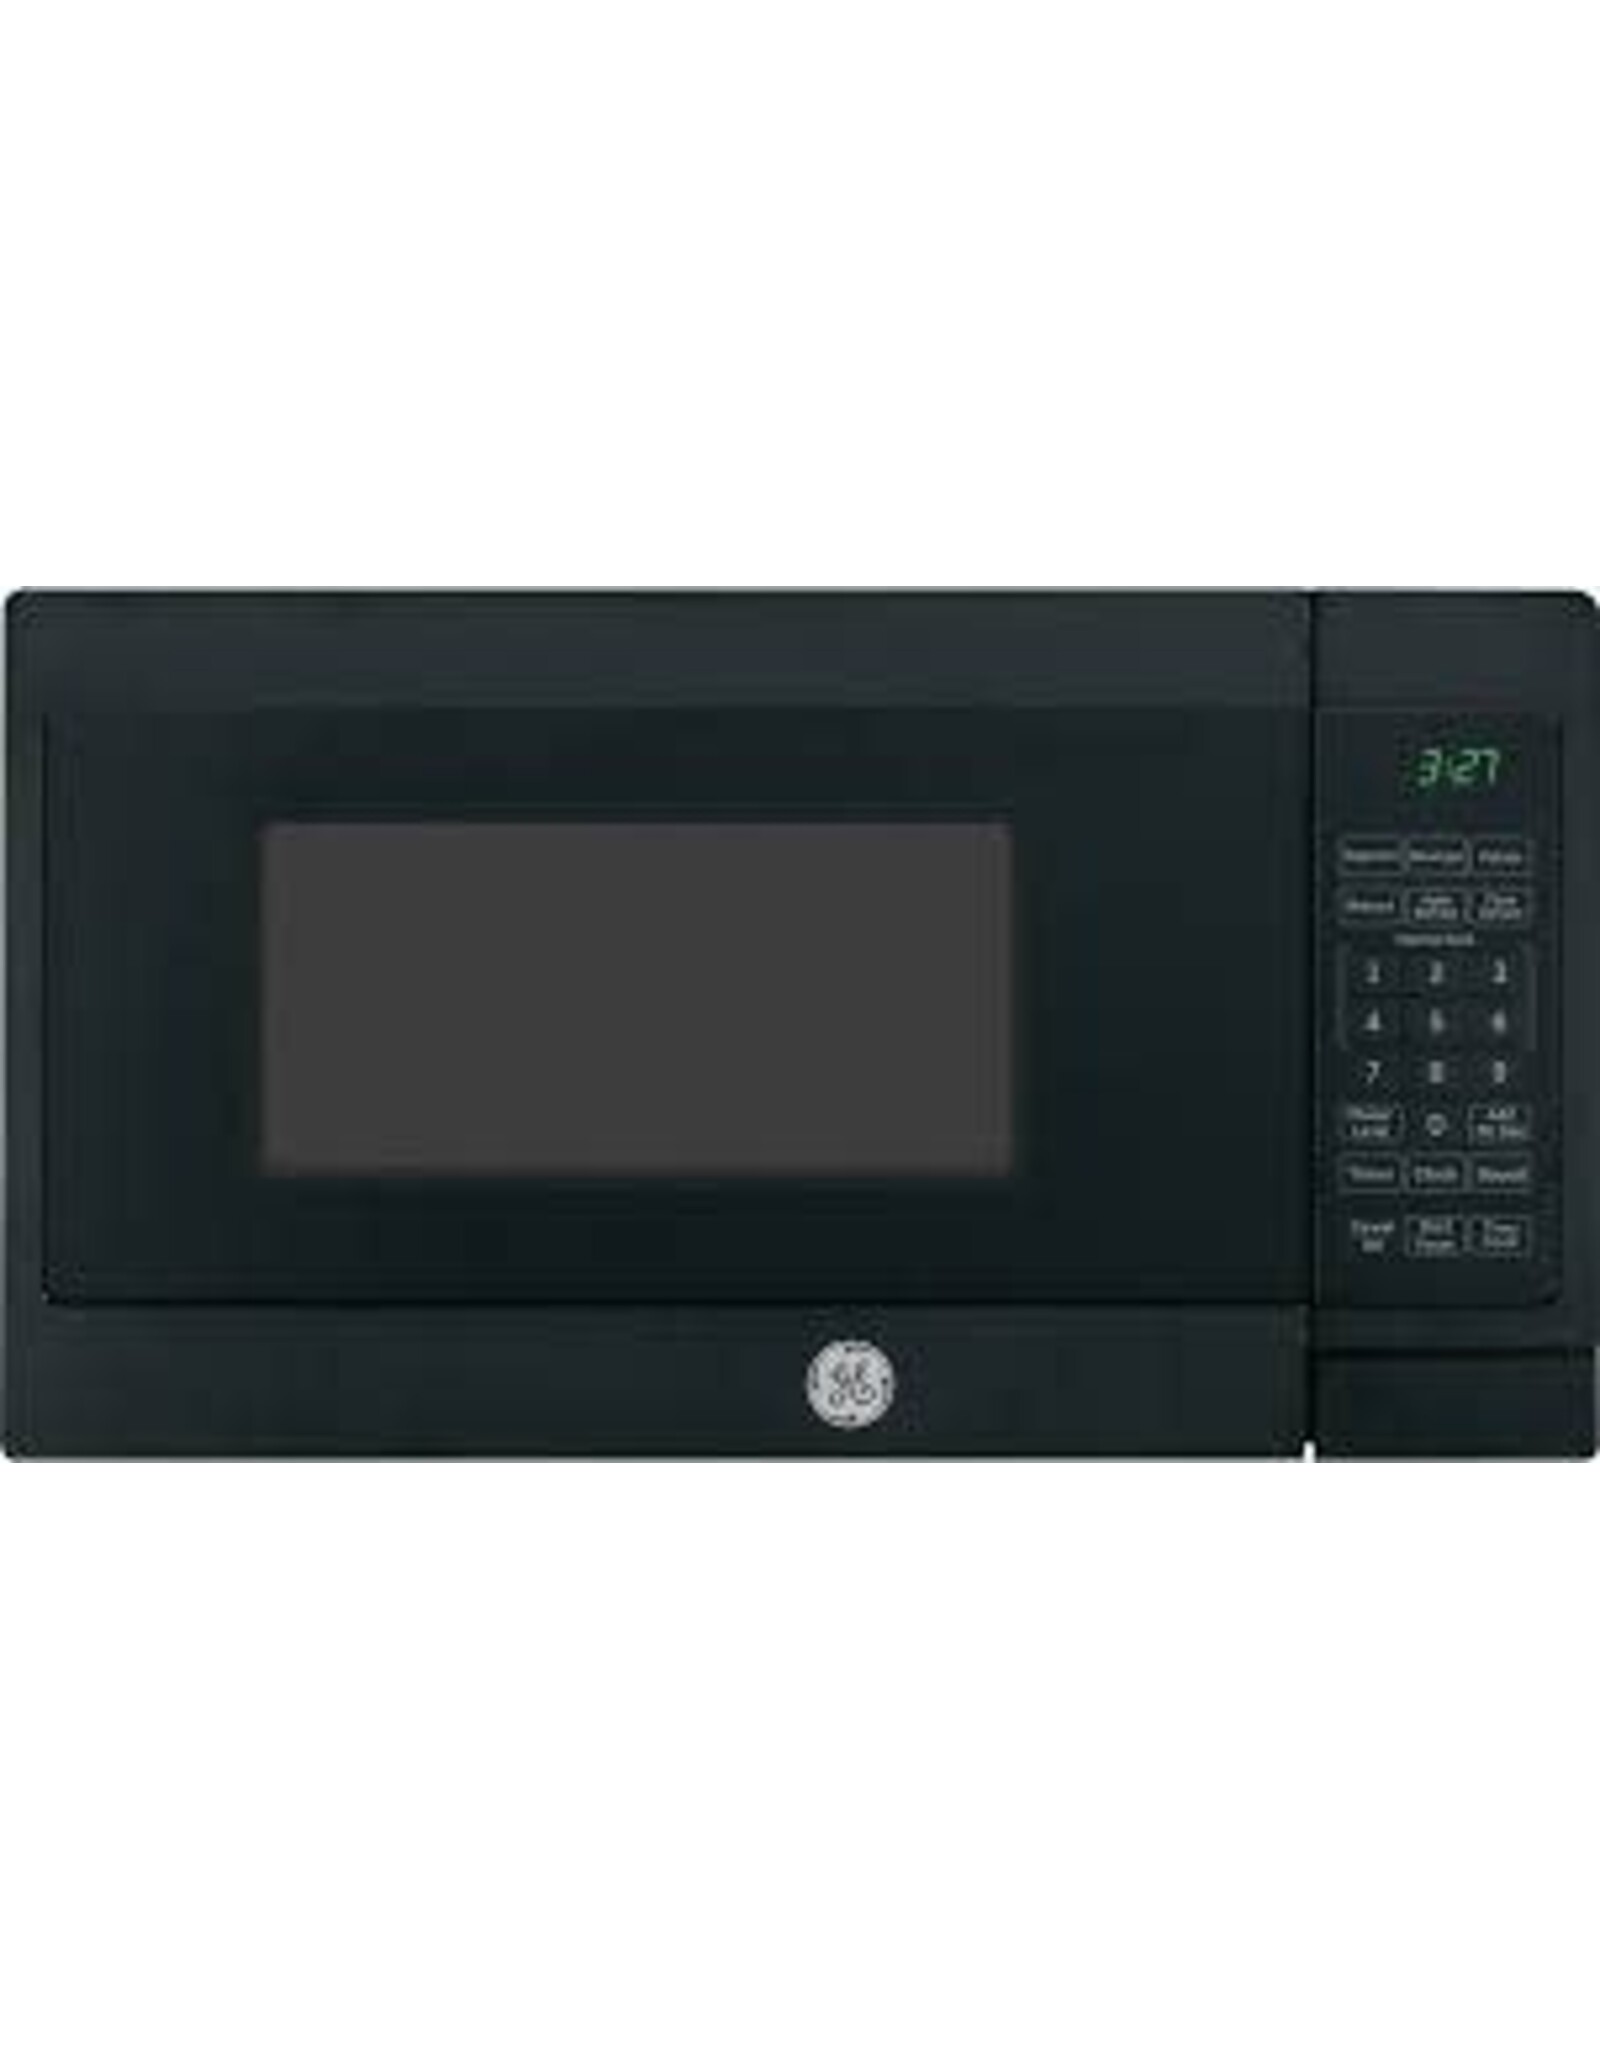 GE JEM3072DH1BB GE Countertop Microwave Oven | 0.7 Cubic Feet Capacity, 700 Watts | Kitchen Essentials for the Countertop | Black